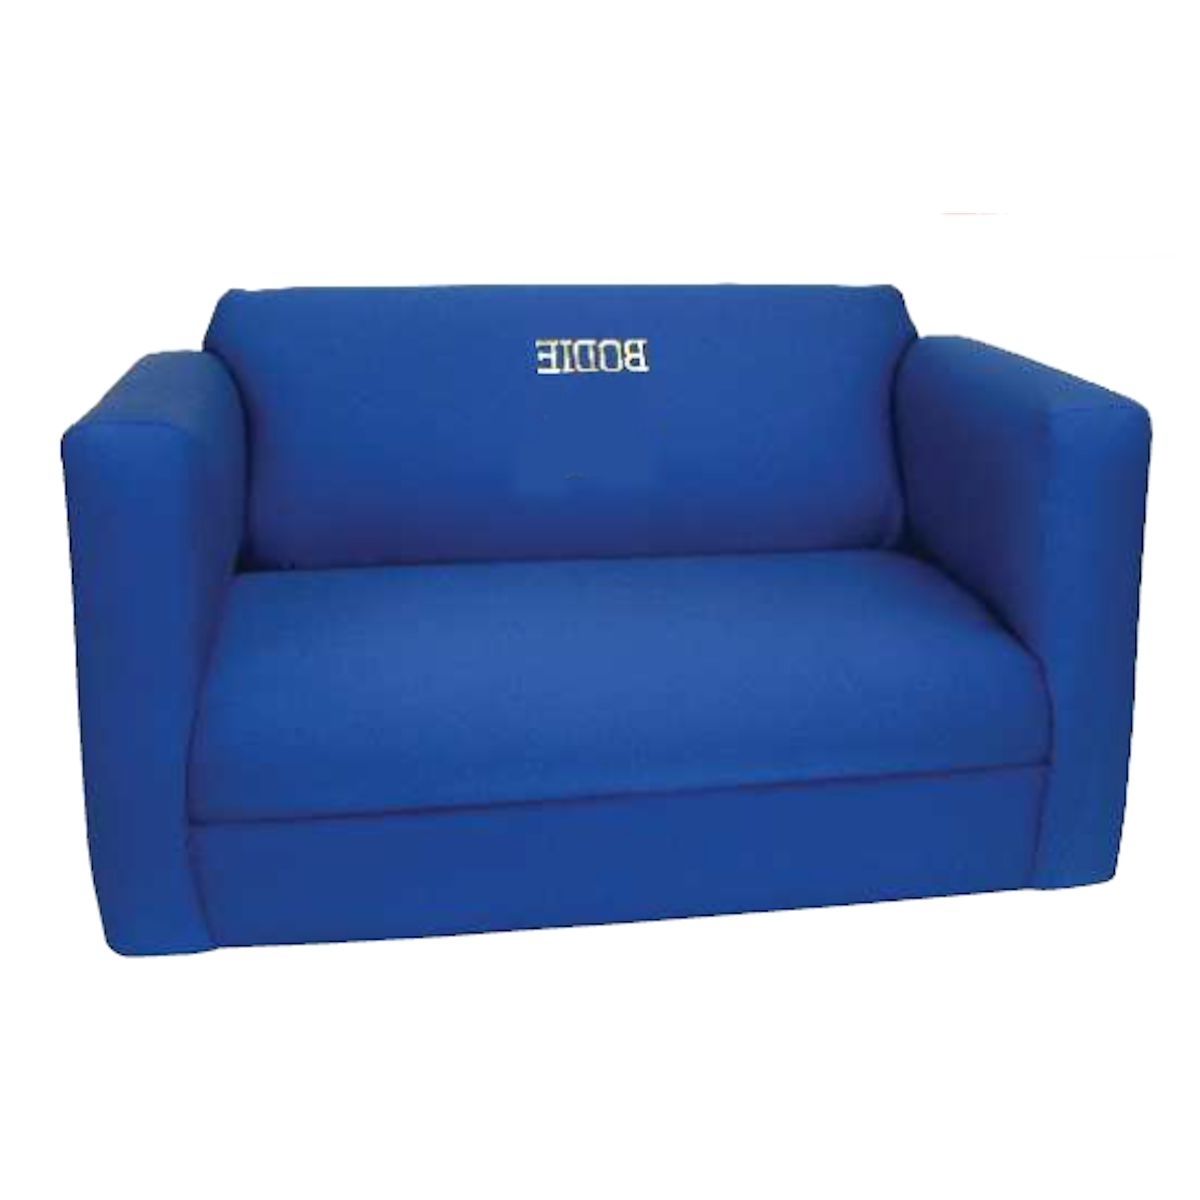 cheap childrens sofa beds